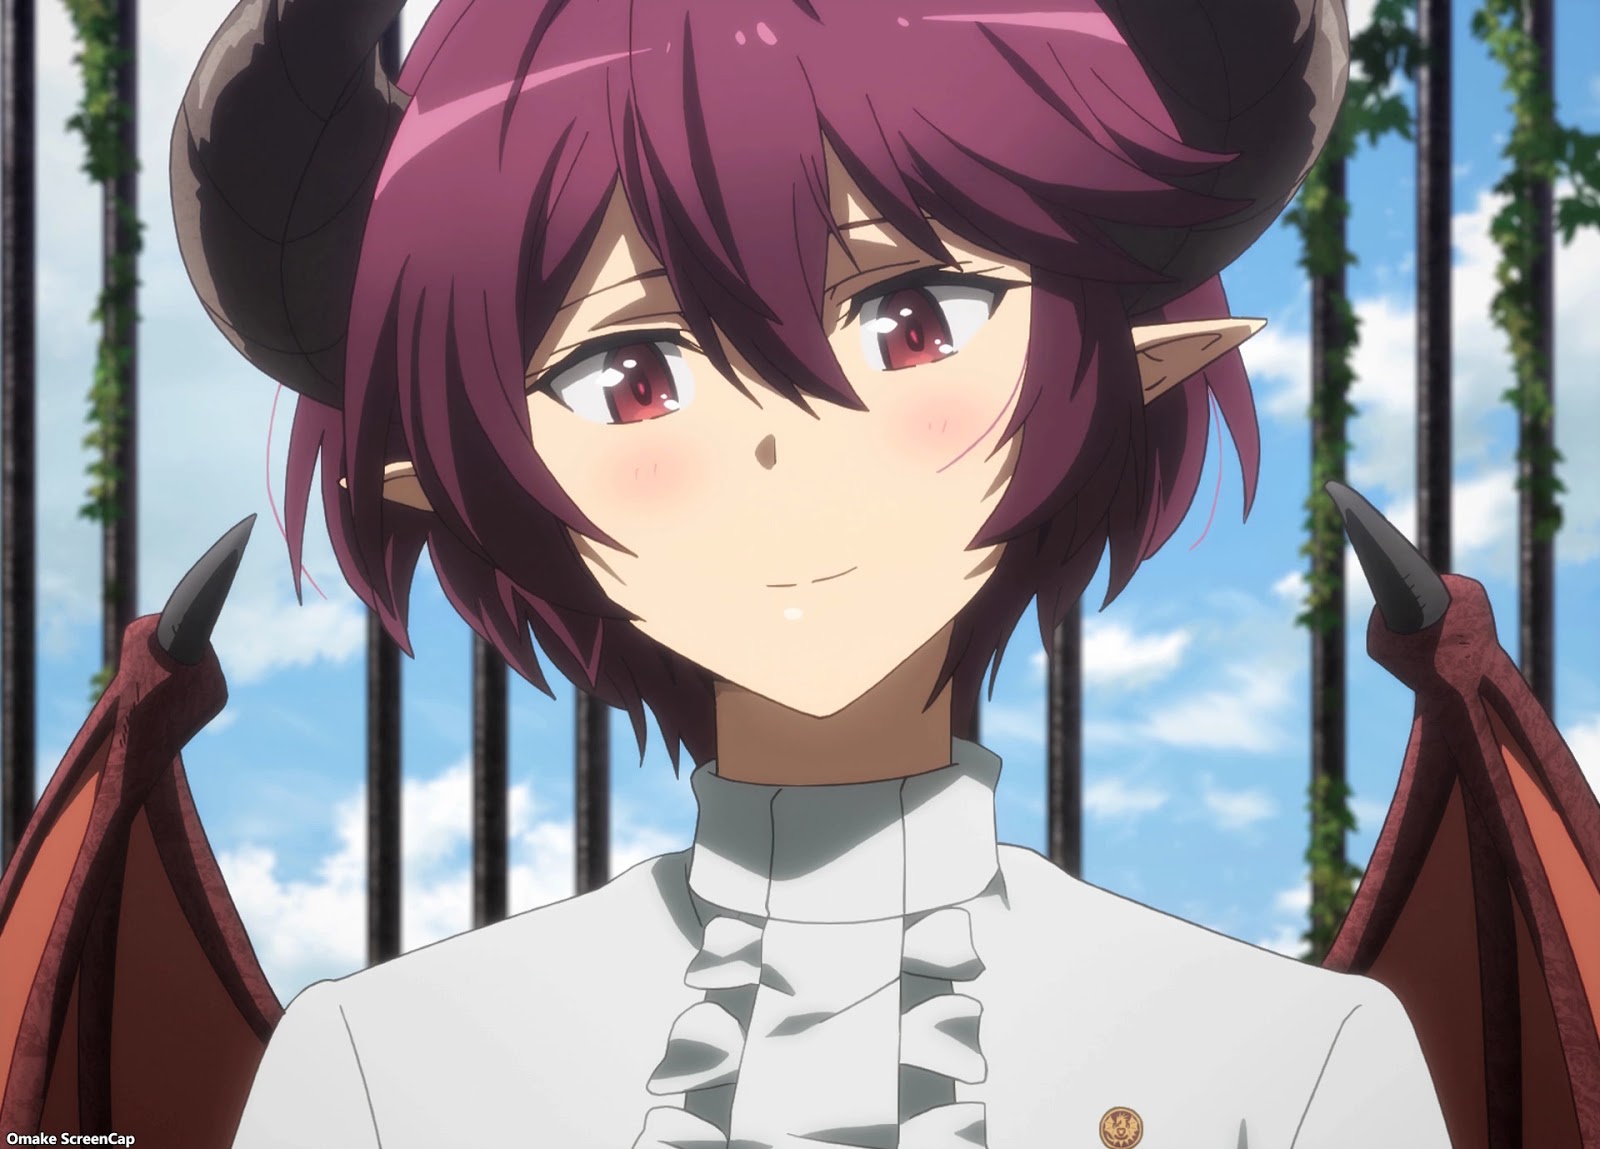 Joeschmo's Gears and Grounds: Omake Gif Anime - Manaria Friends - Episode 4  - Grea Zooms In